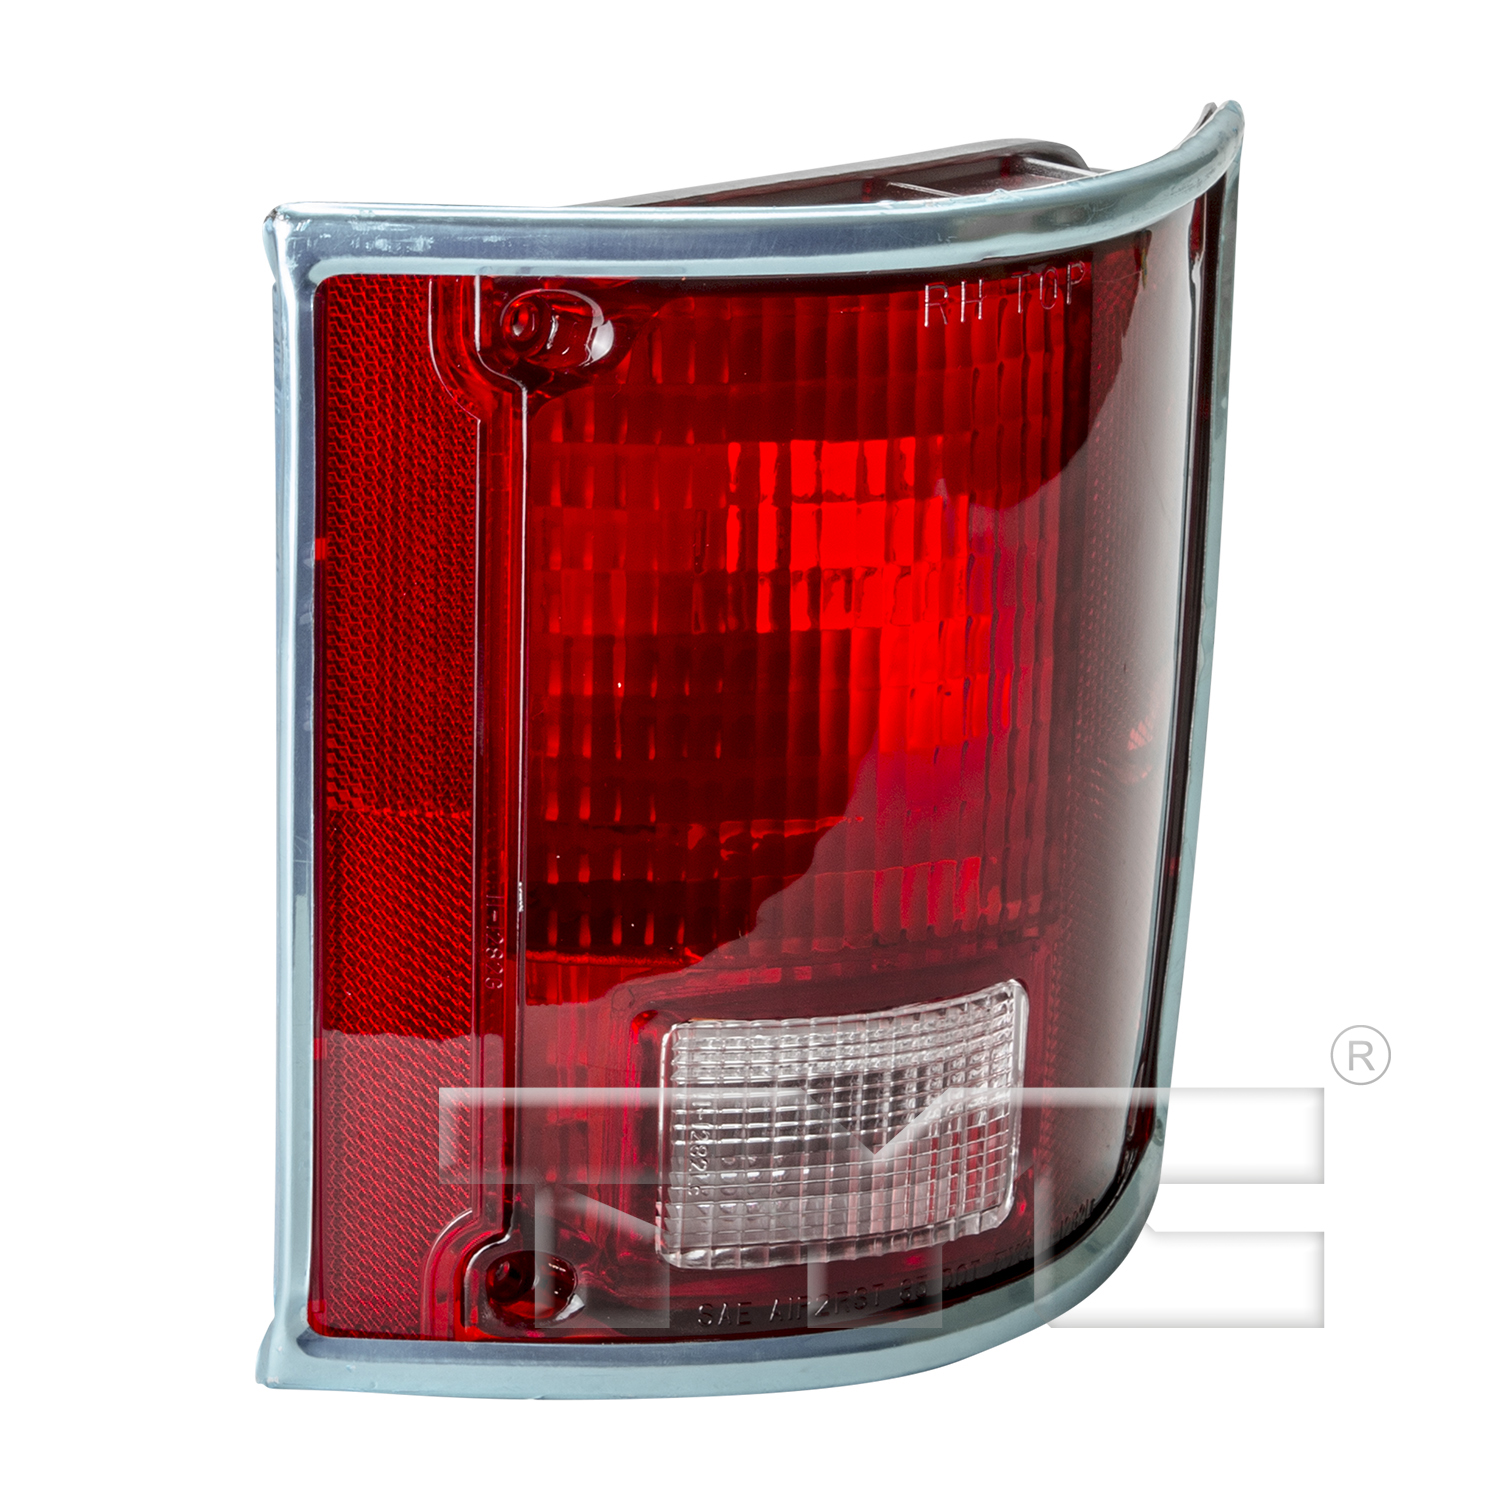 Aftermarket TAILLIGHTS for CHEVROLET - C2500, C2500,88-91,RT Taillamp assy